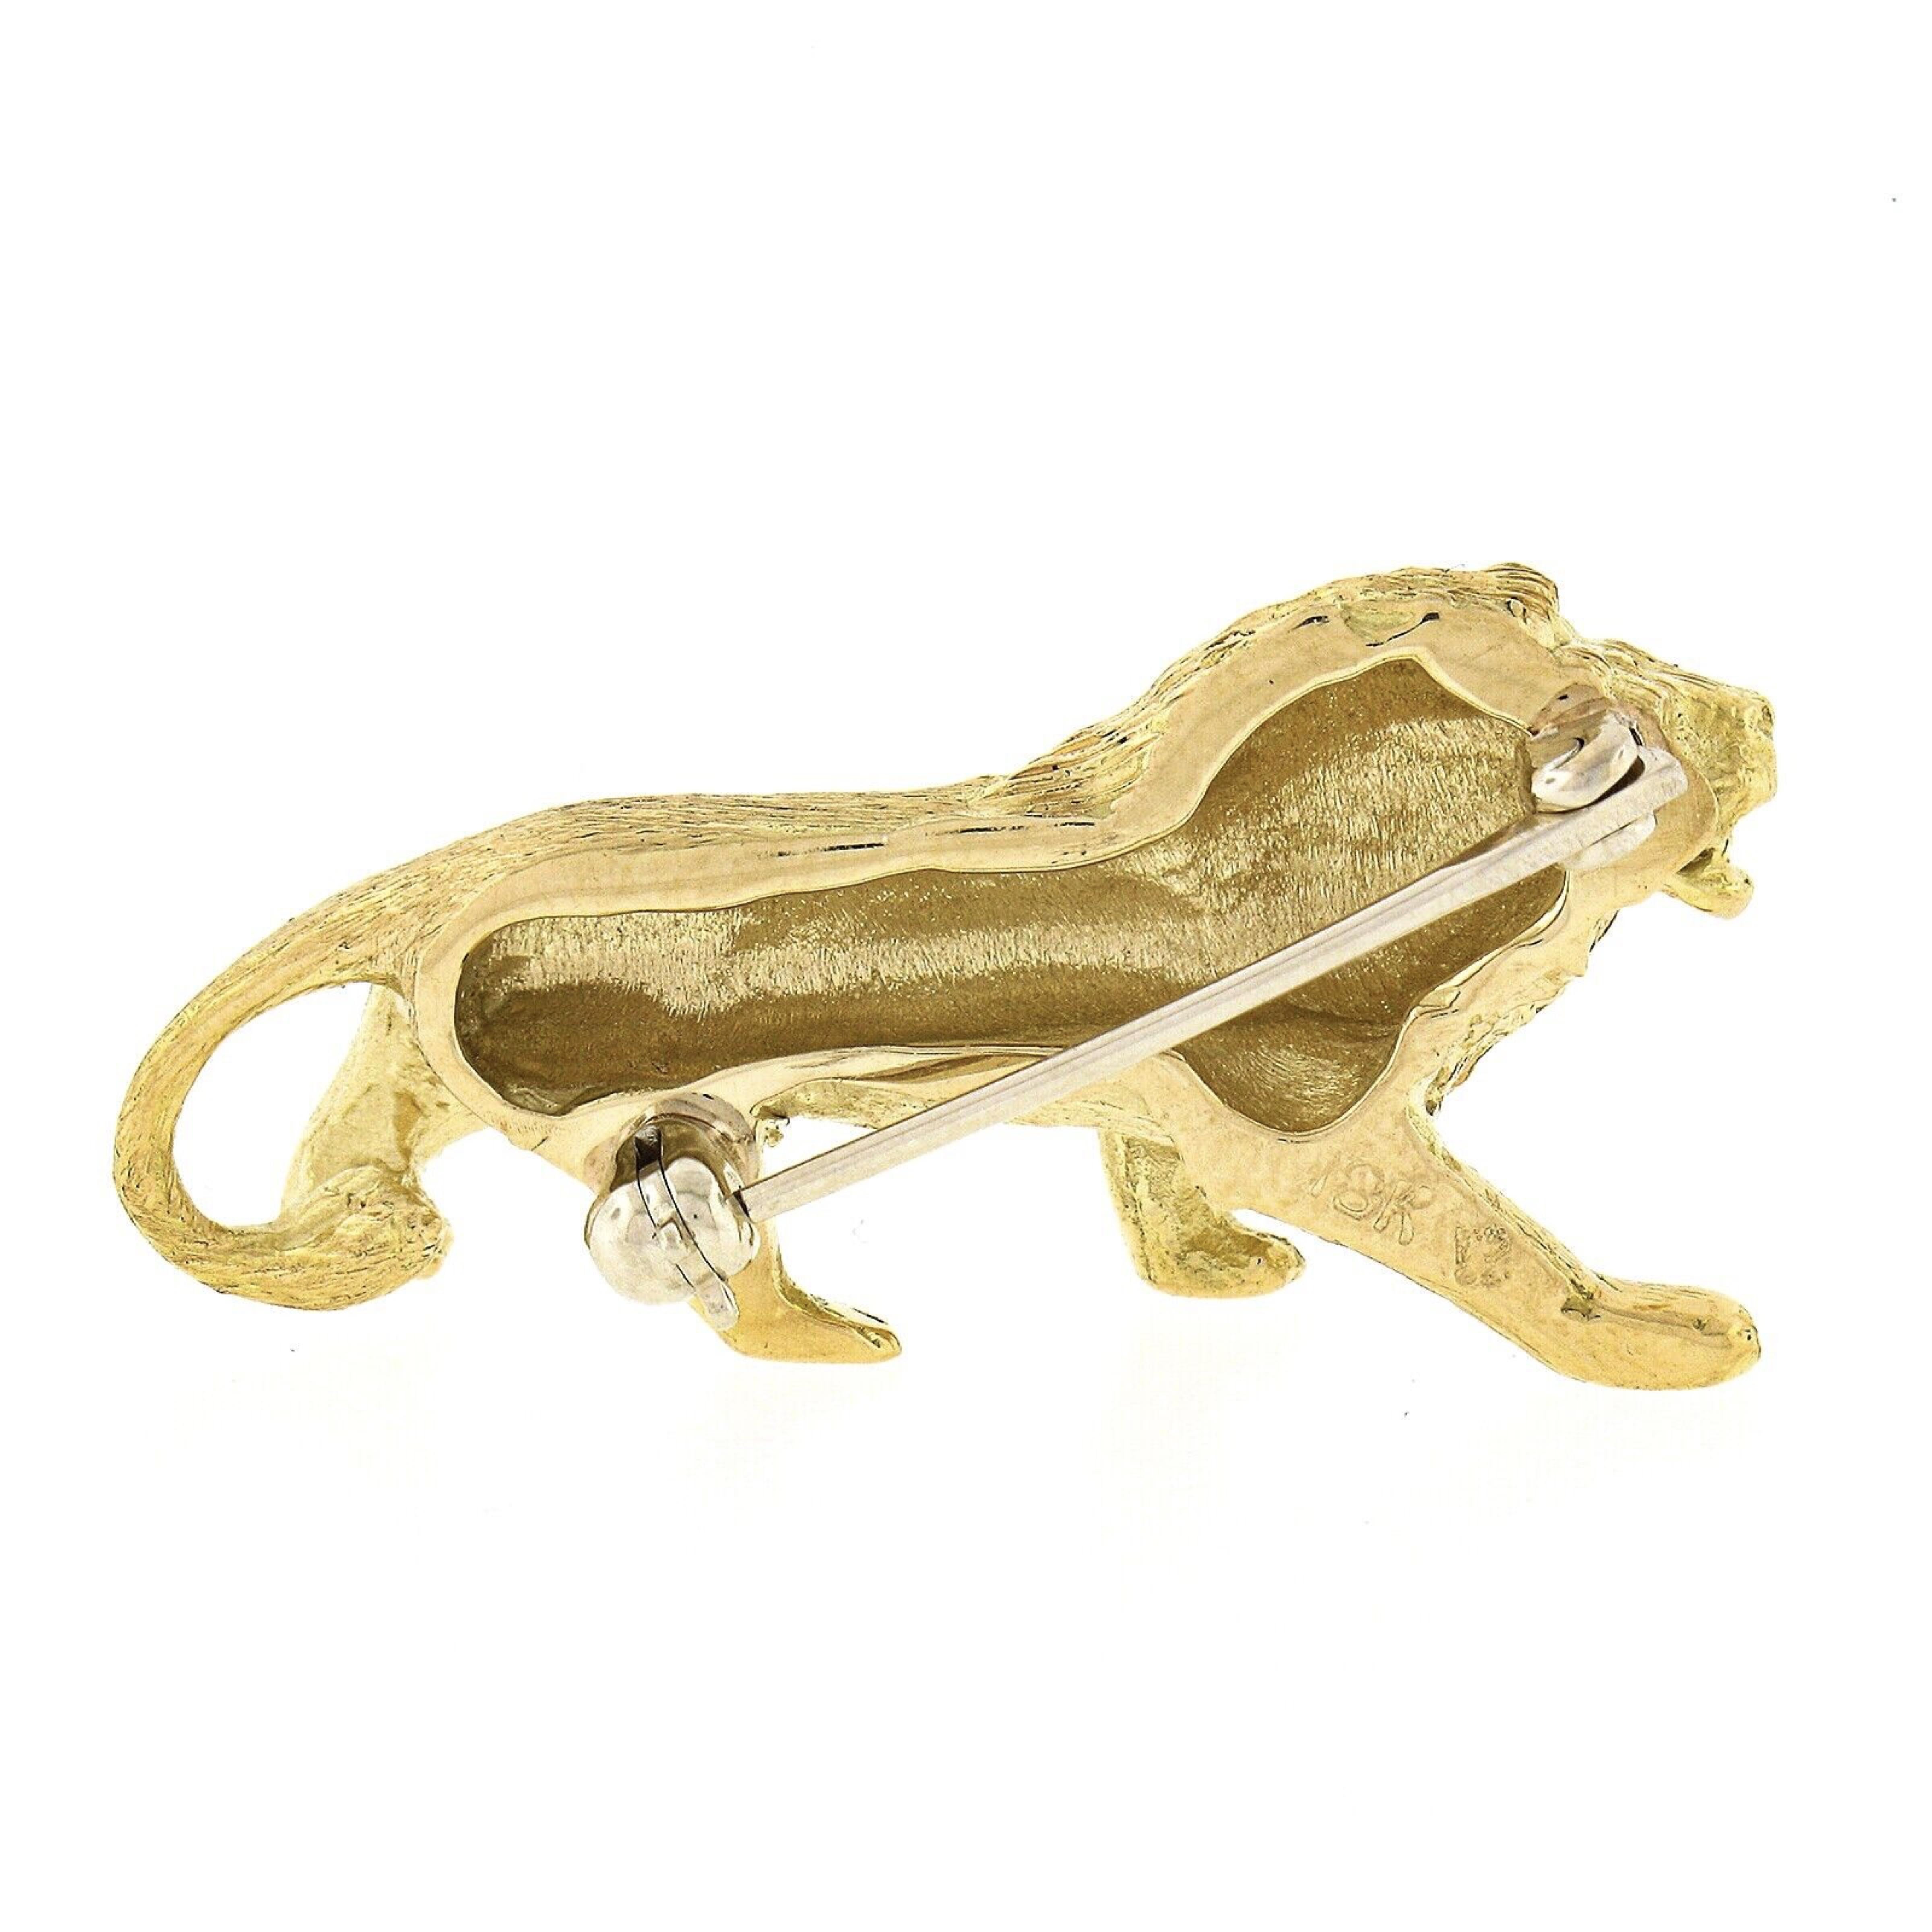 This wonderful vintage brooch/pin is crafted in solid 18k yellow gold and features a perfectly structured standing lion design with unique, and remarkably outstanding workmanship and texture that bring out maximum detailing granting an exceptional